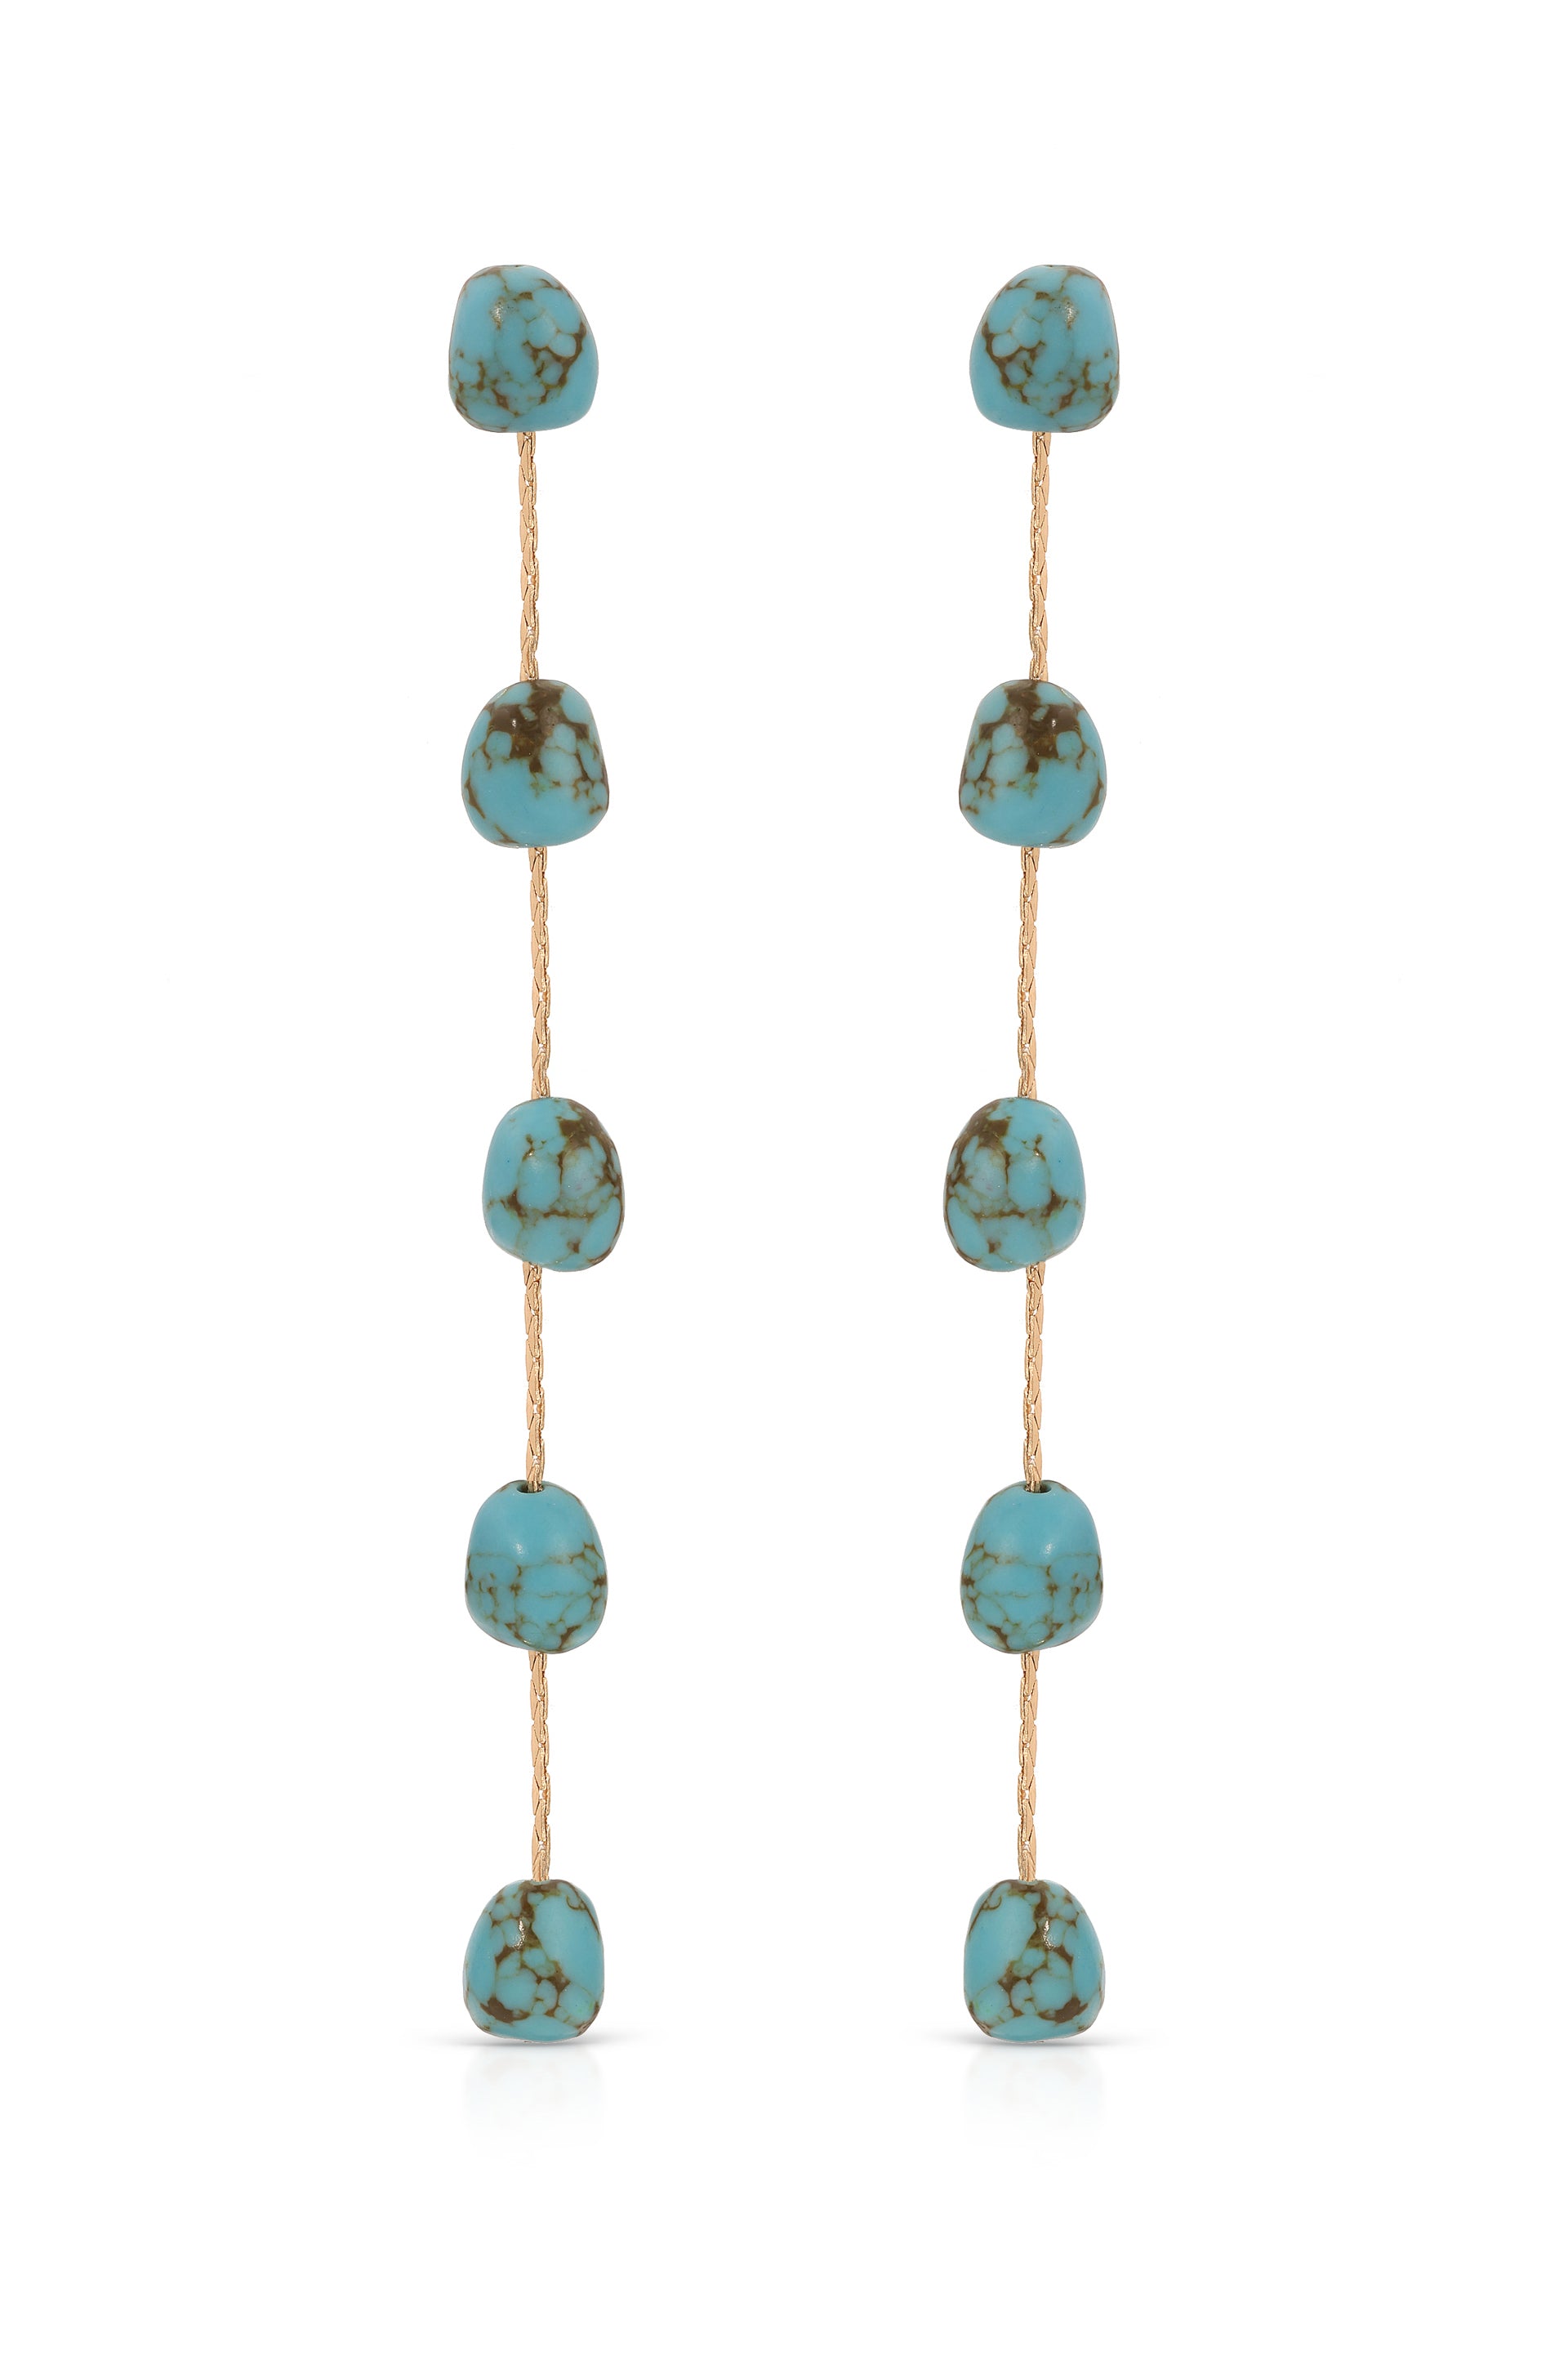 Dripping Turquoise Delicate Drop Earrings